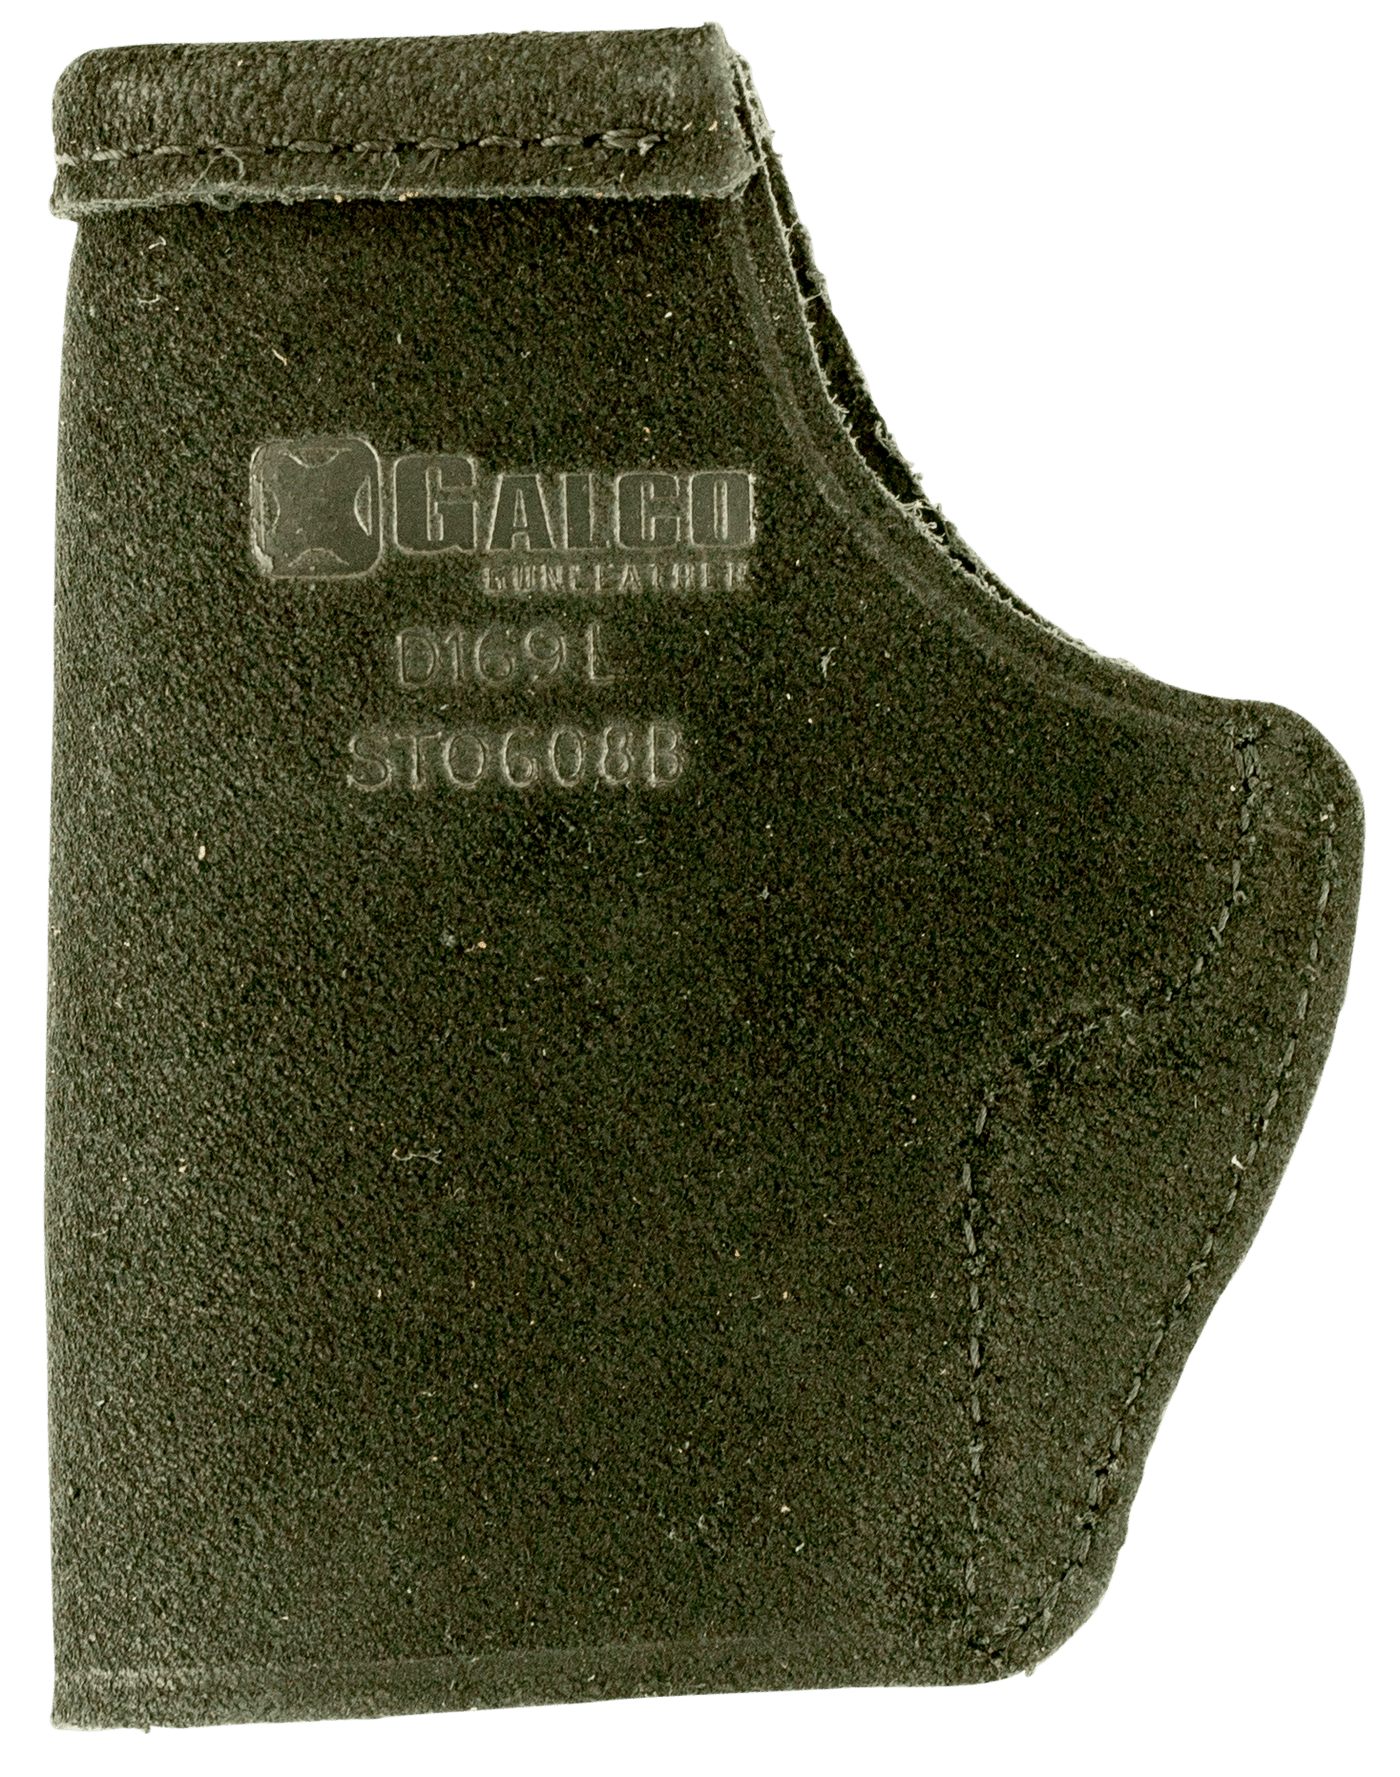 Galco Galco Stow-n-go Inside Pant - Rh Lthr Sig P365/glk 42 Black Holsters And Related Items